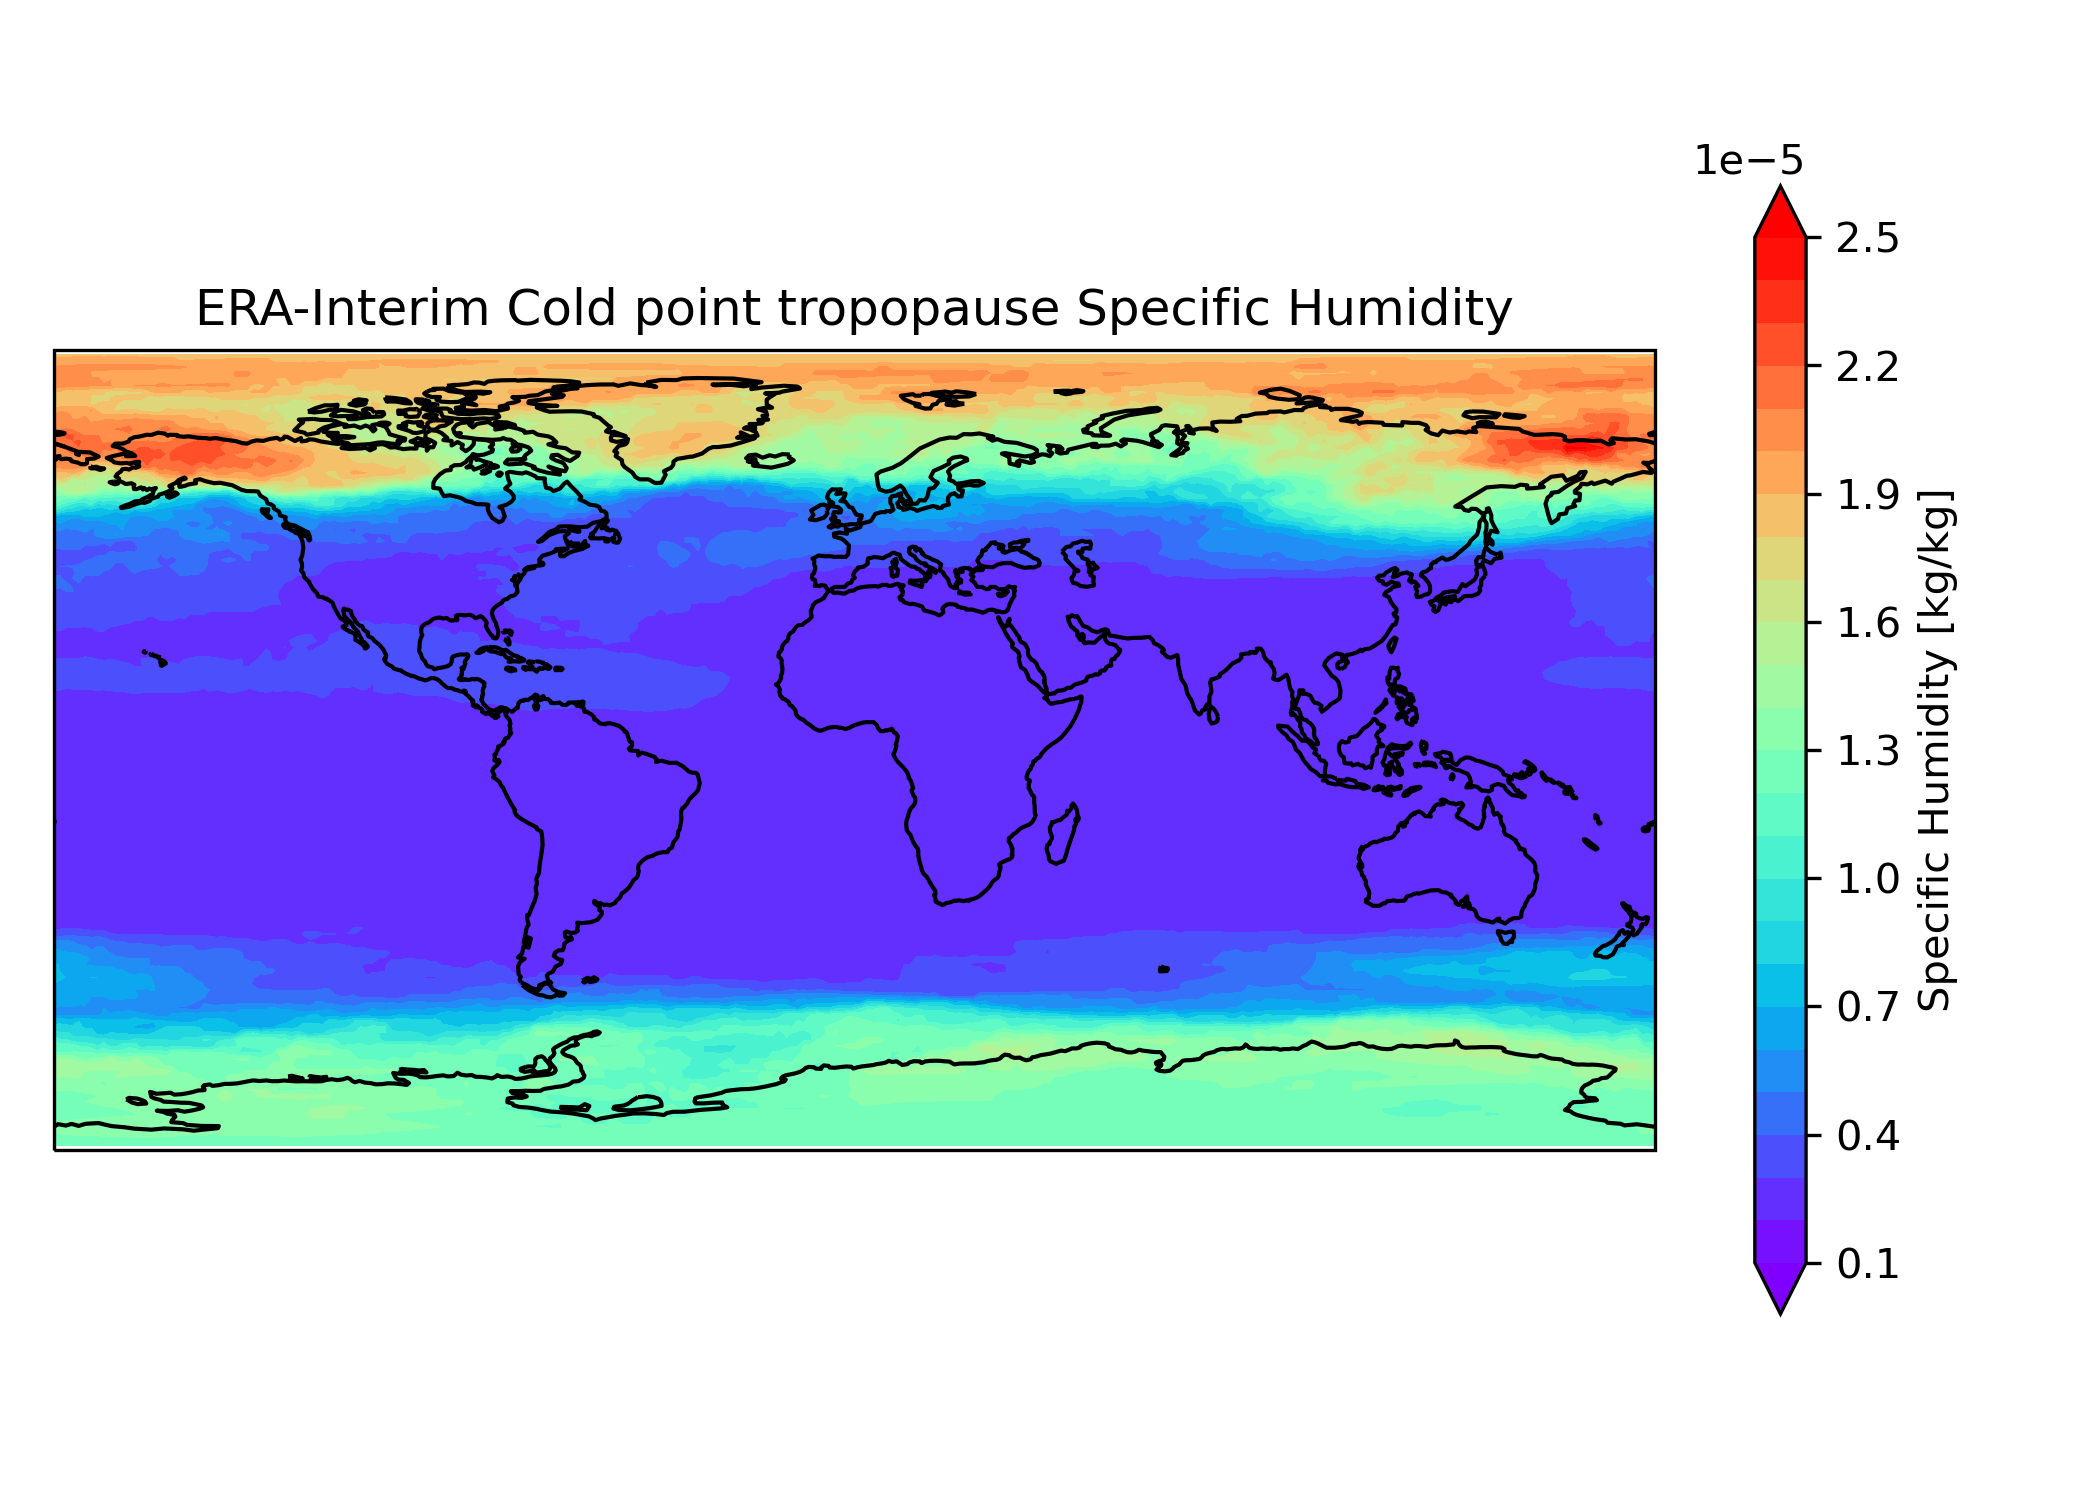 ../_images/fig_ERA-Interim_Cold_point_tropopause_Specific_Humidity_map.png